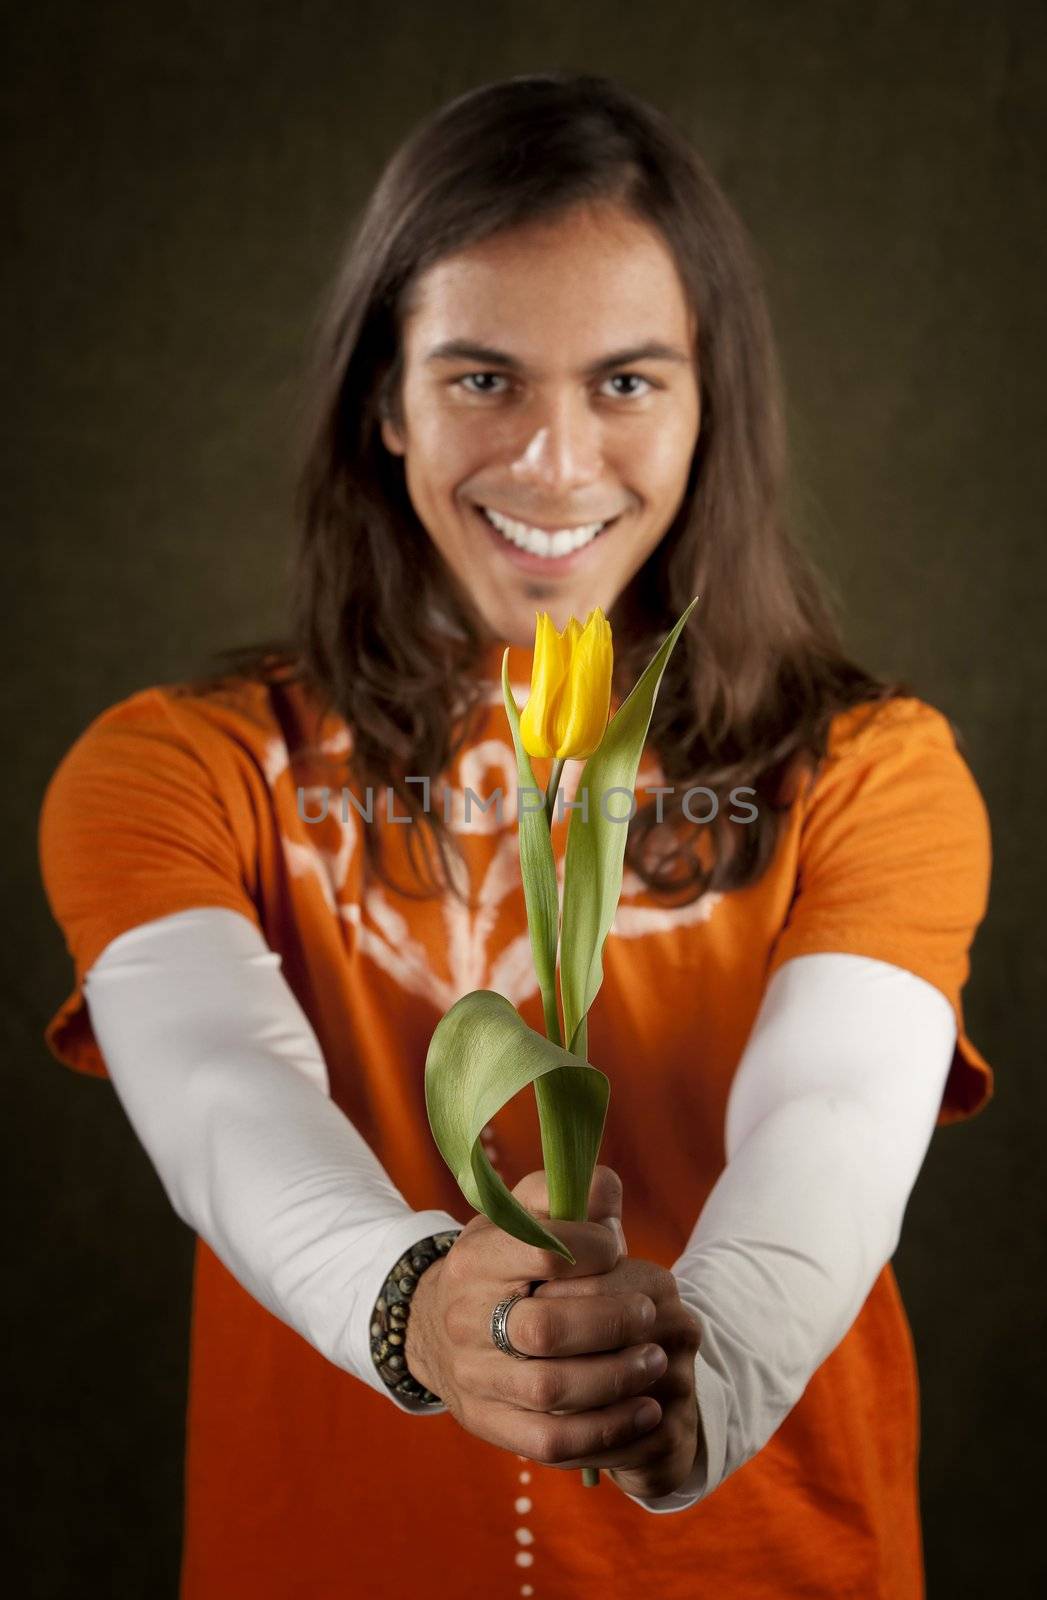 Handsome man reaching out with yellow tulip flower